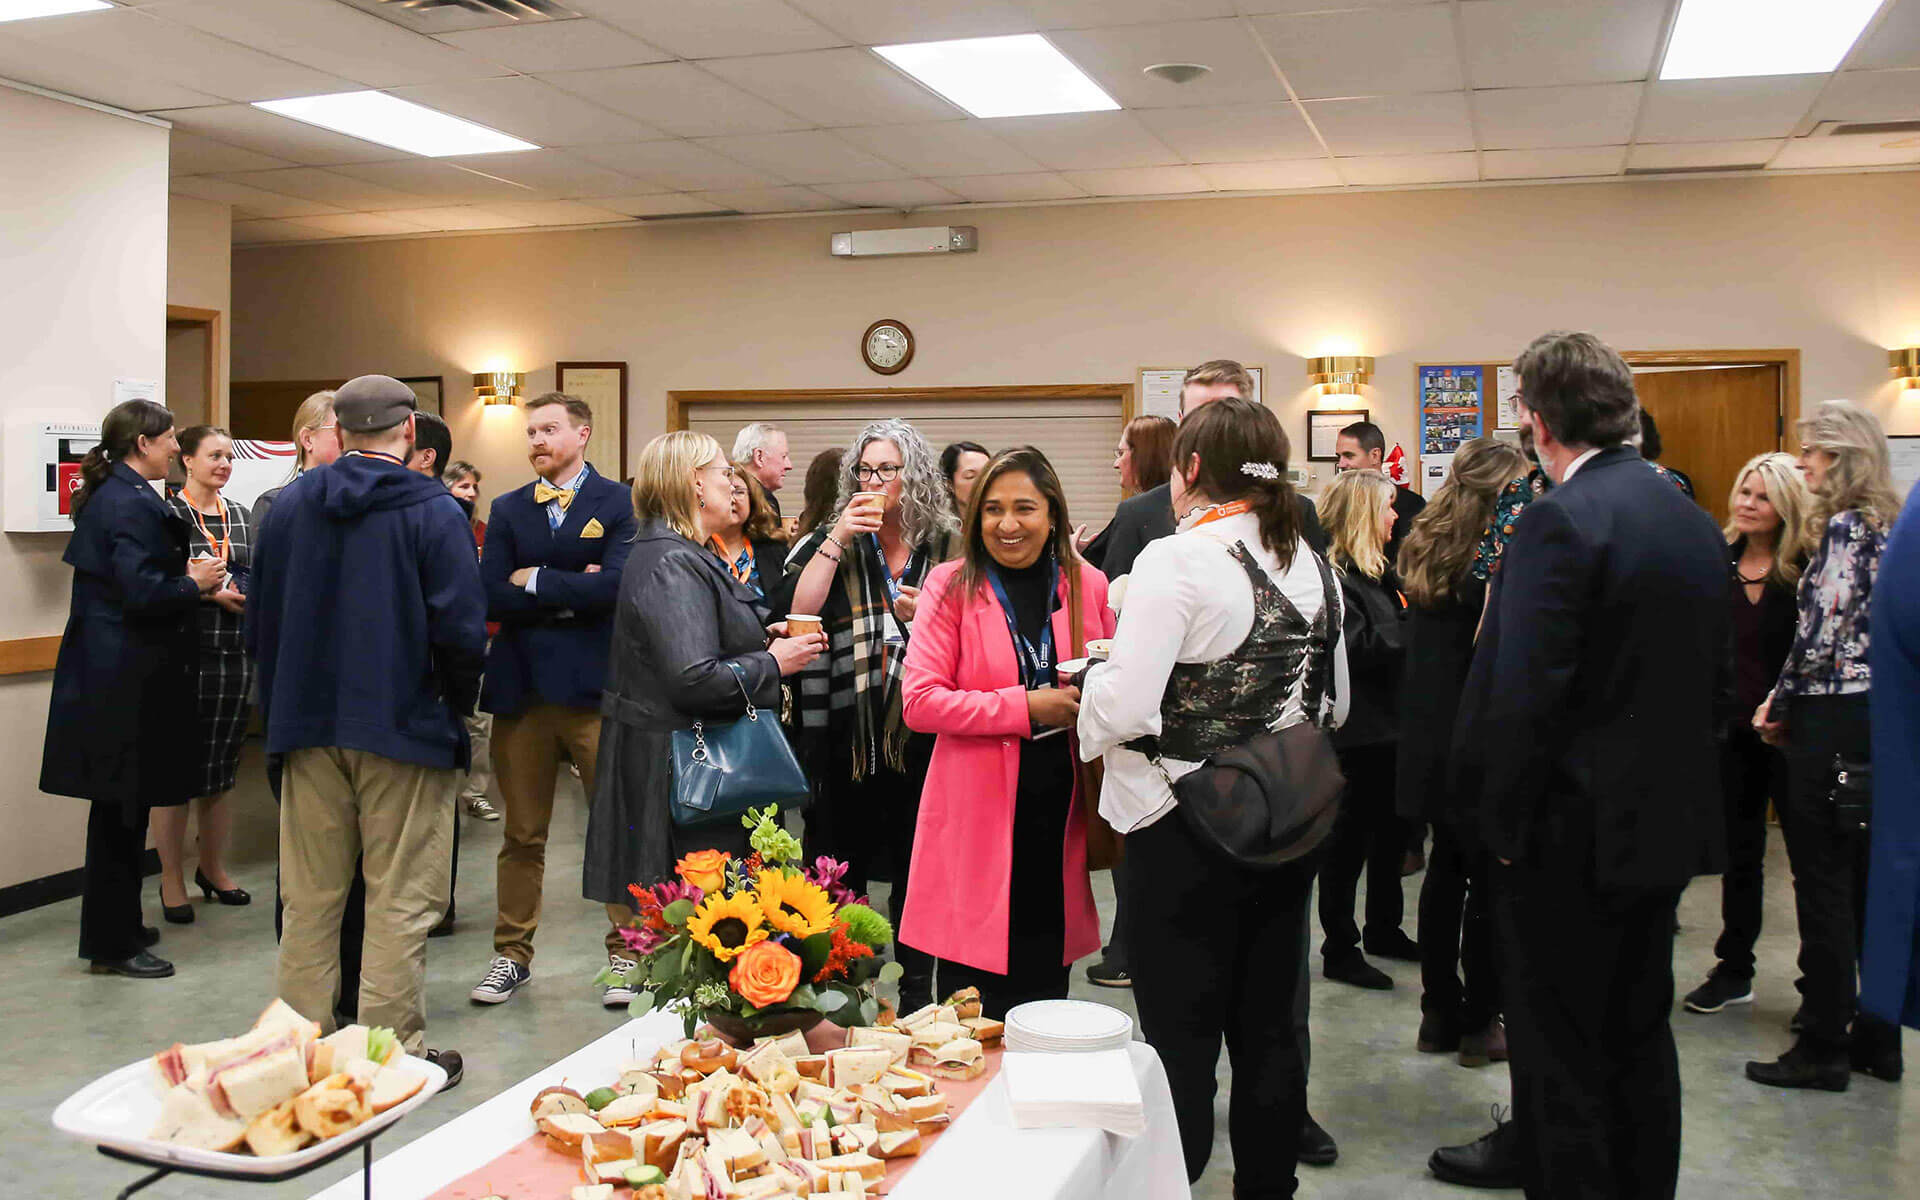 AU team members and Athabasca community members gather for a reception following the presidential installation.